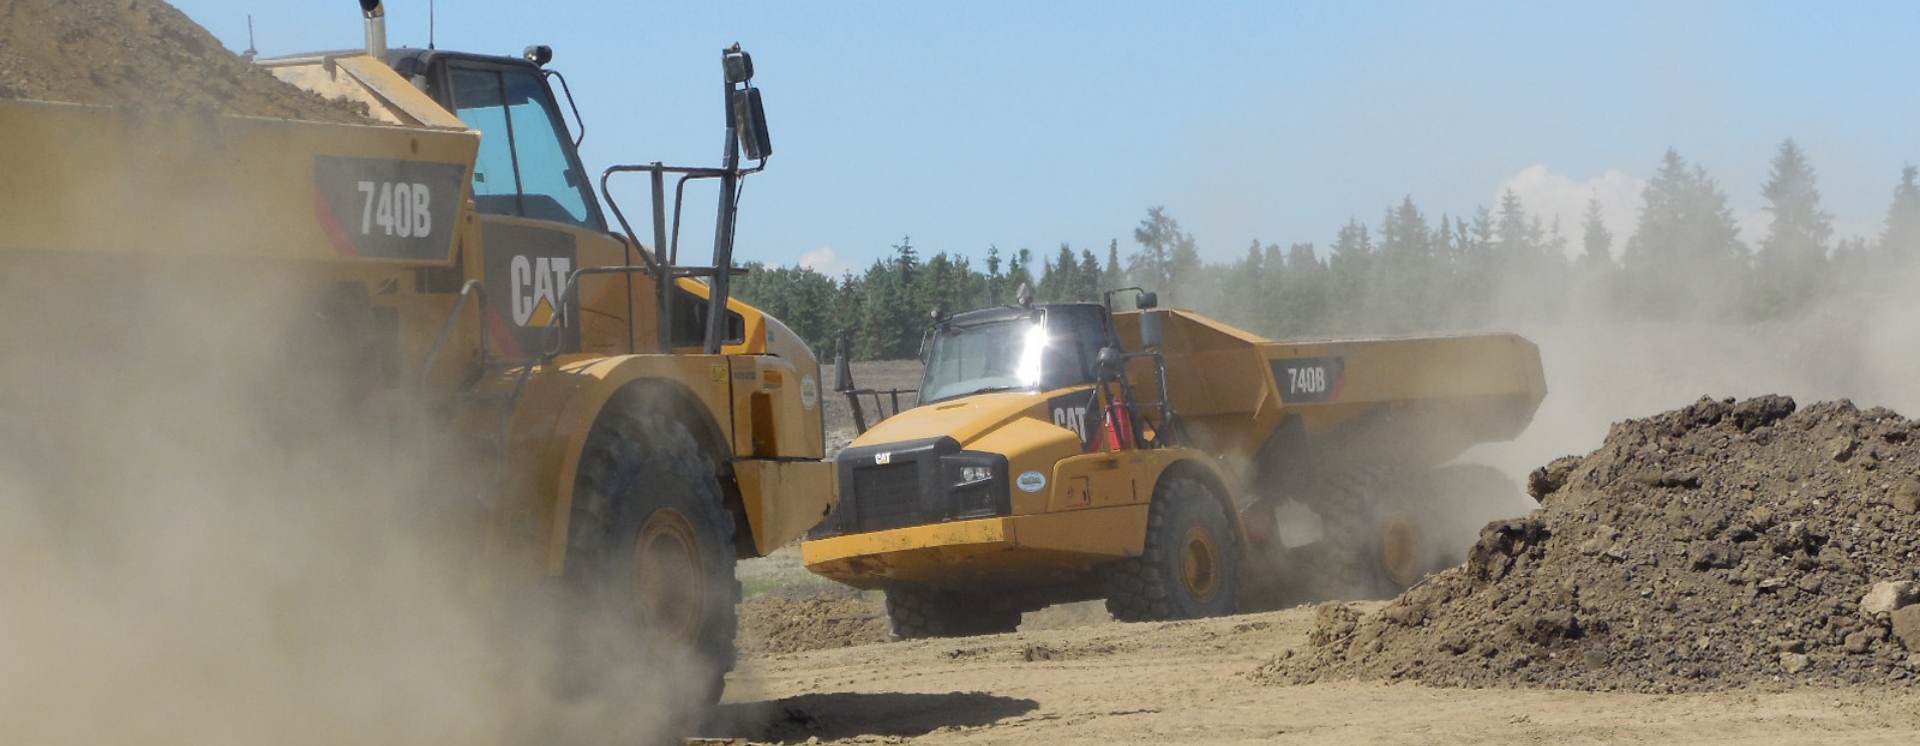 Contrac offers heavy equipment rentals from top mainline manufacturers in Alberta